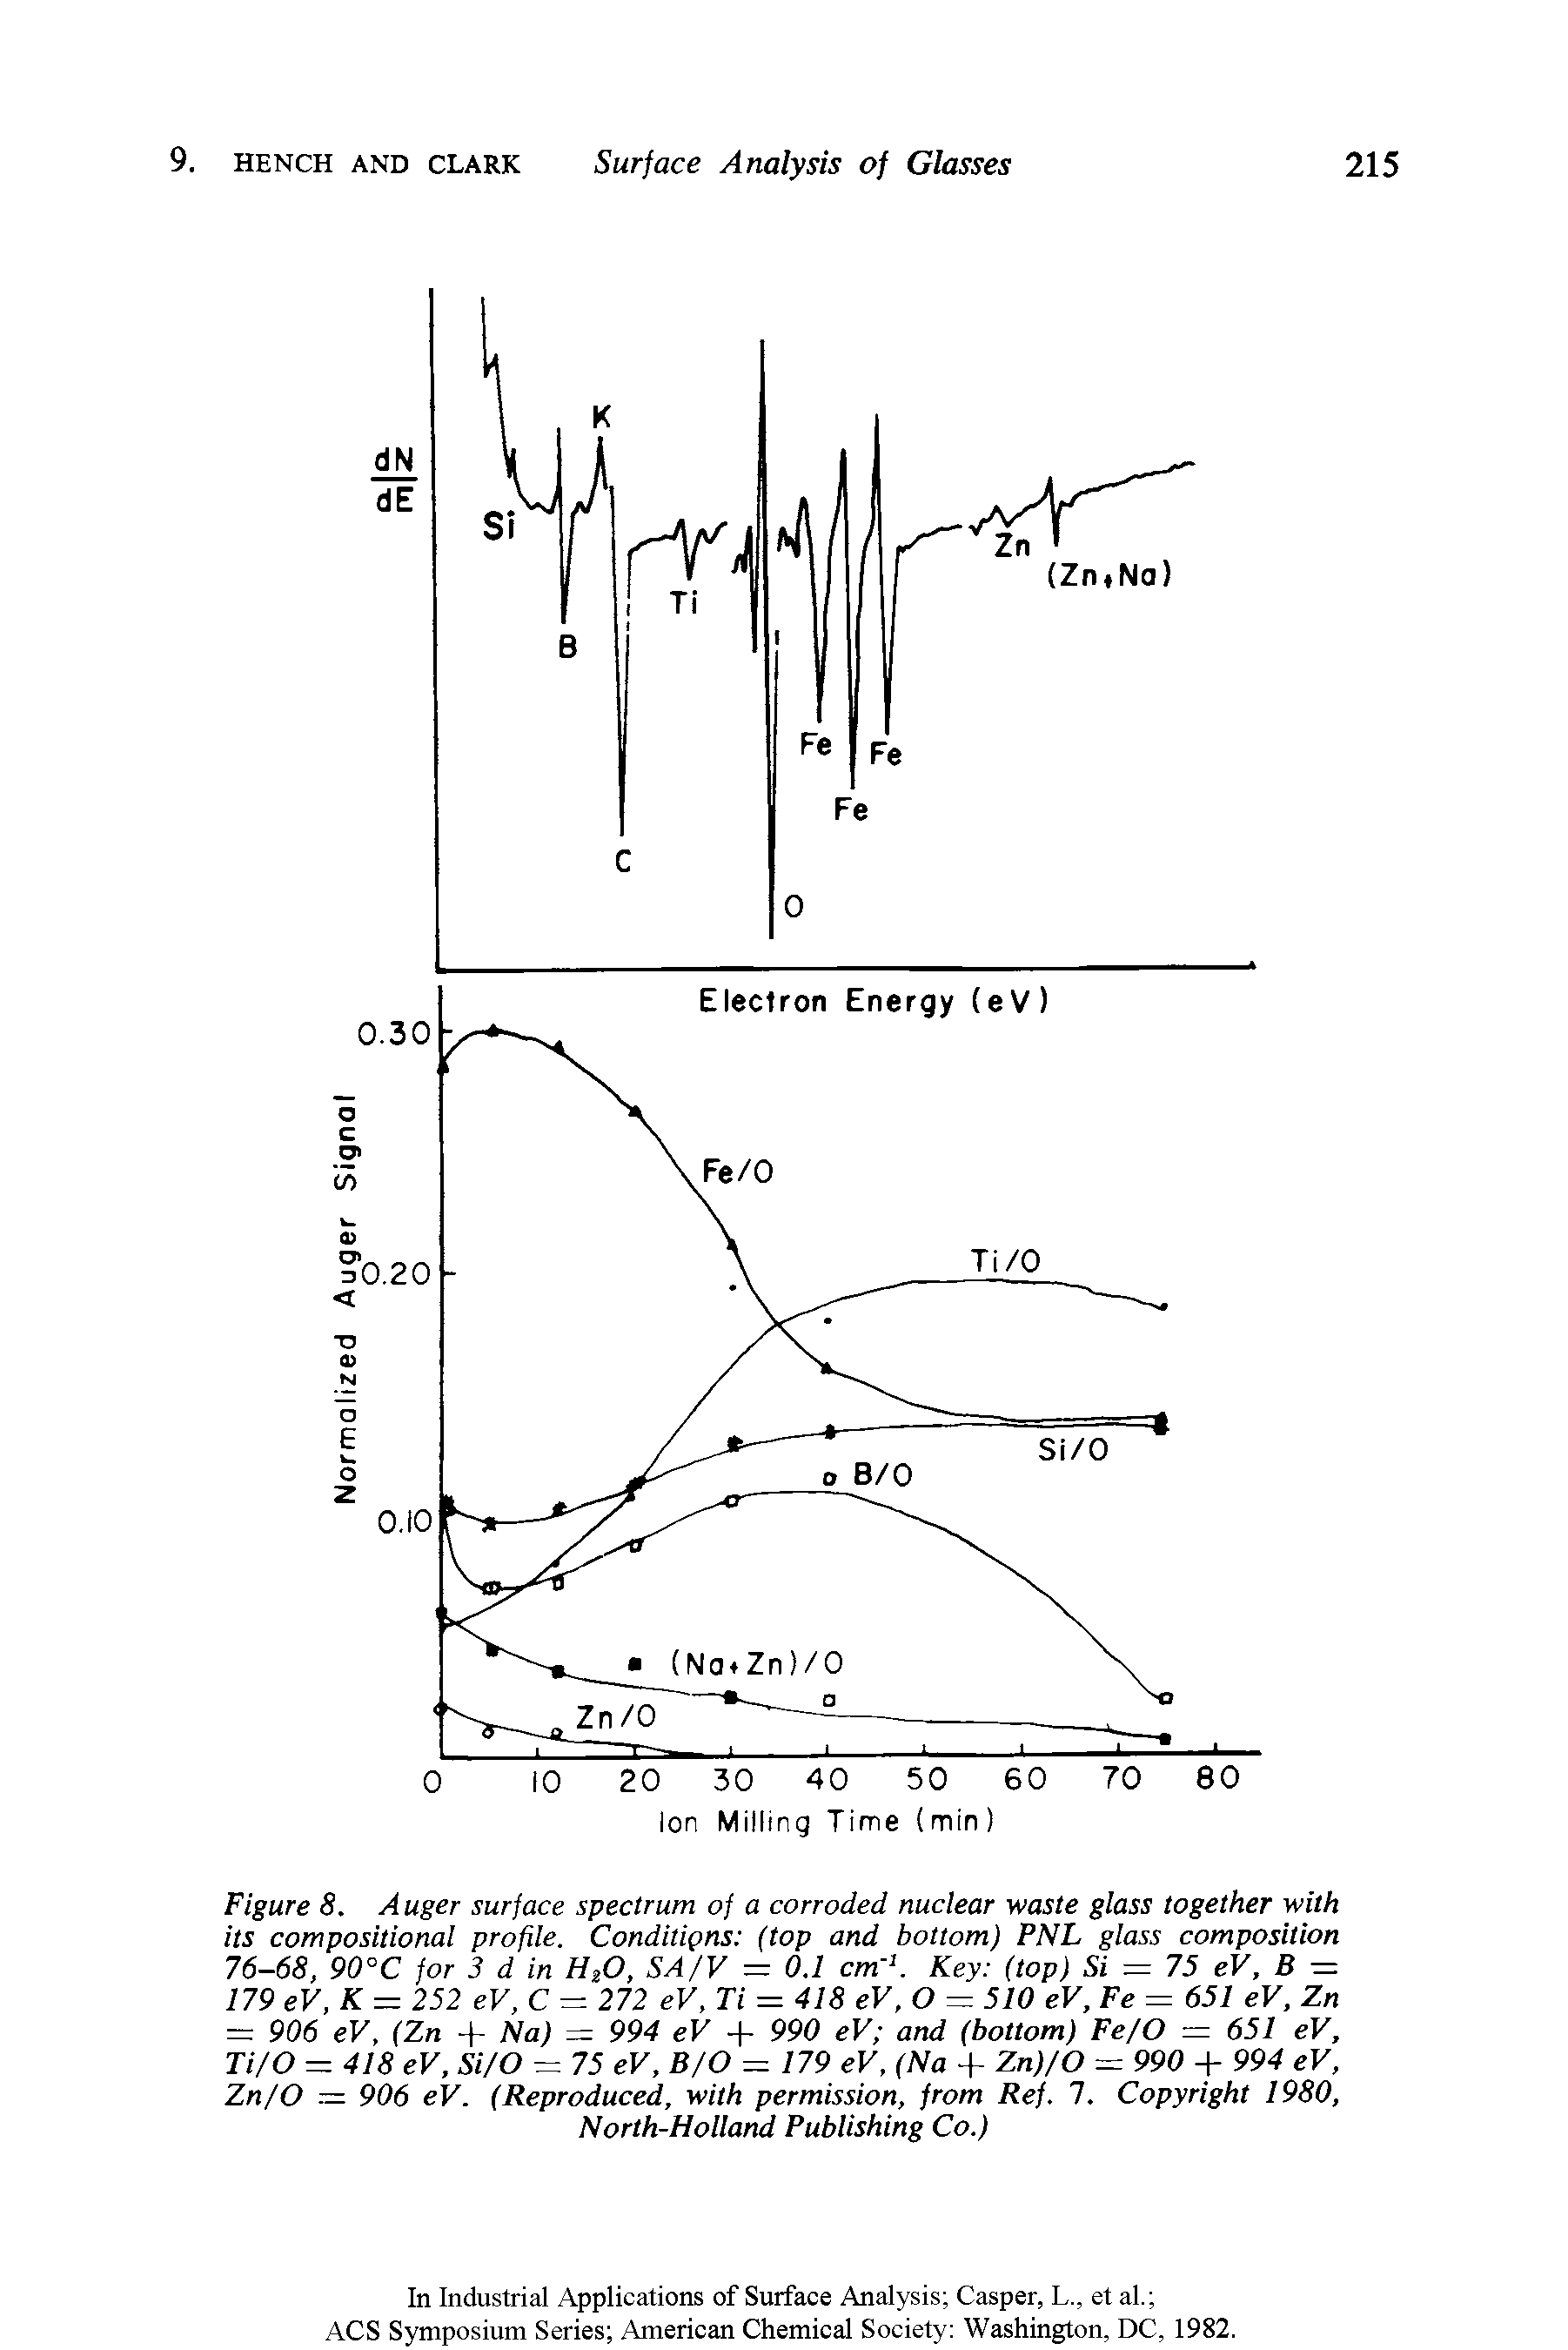 Figure 8. Auger surface spectrum of a corroded nuclear waste glass together with its compositional profile. Conditions (top and bottom) PNL glass composition 76-68, 90°C for 3 d in HgO, SA/V = 0.1 cm 1. Key (top) Si - 75 eV, B —...